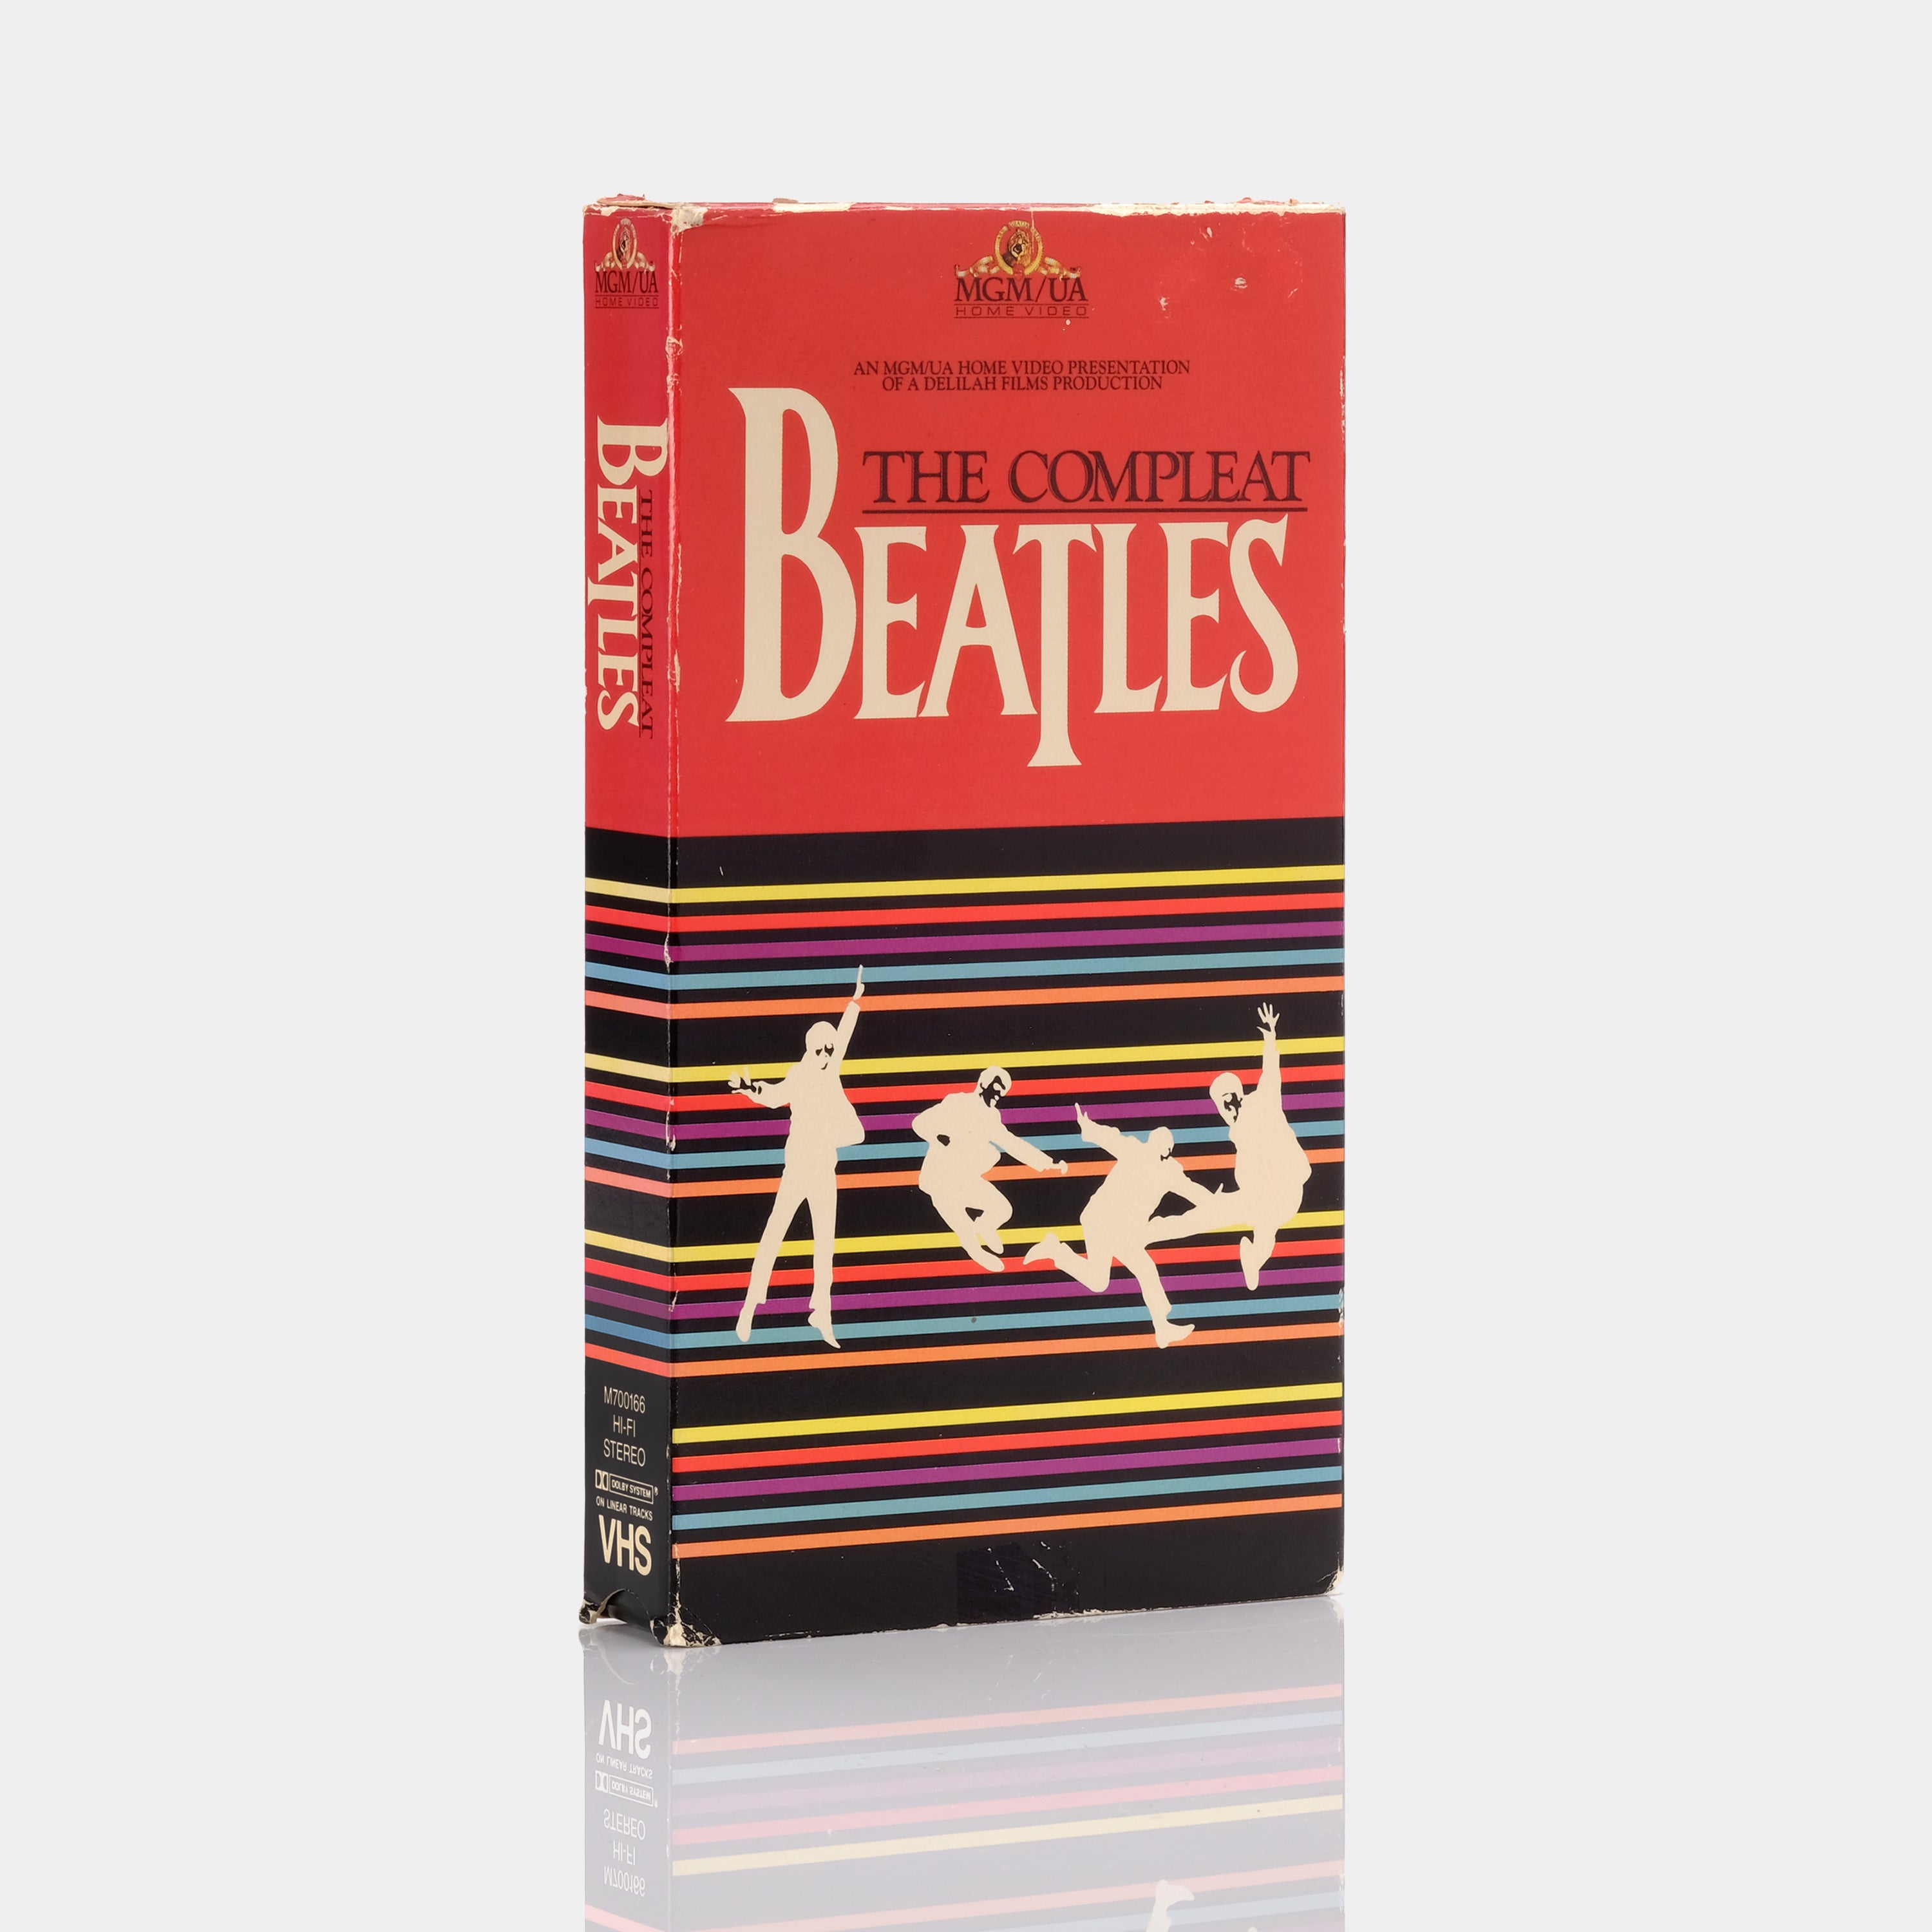 The Complete Beatles VHS Tape